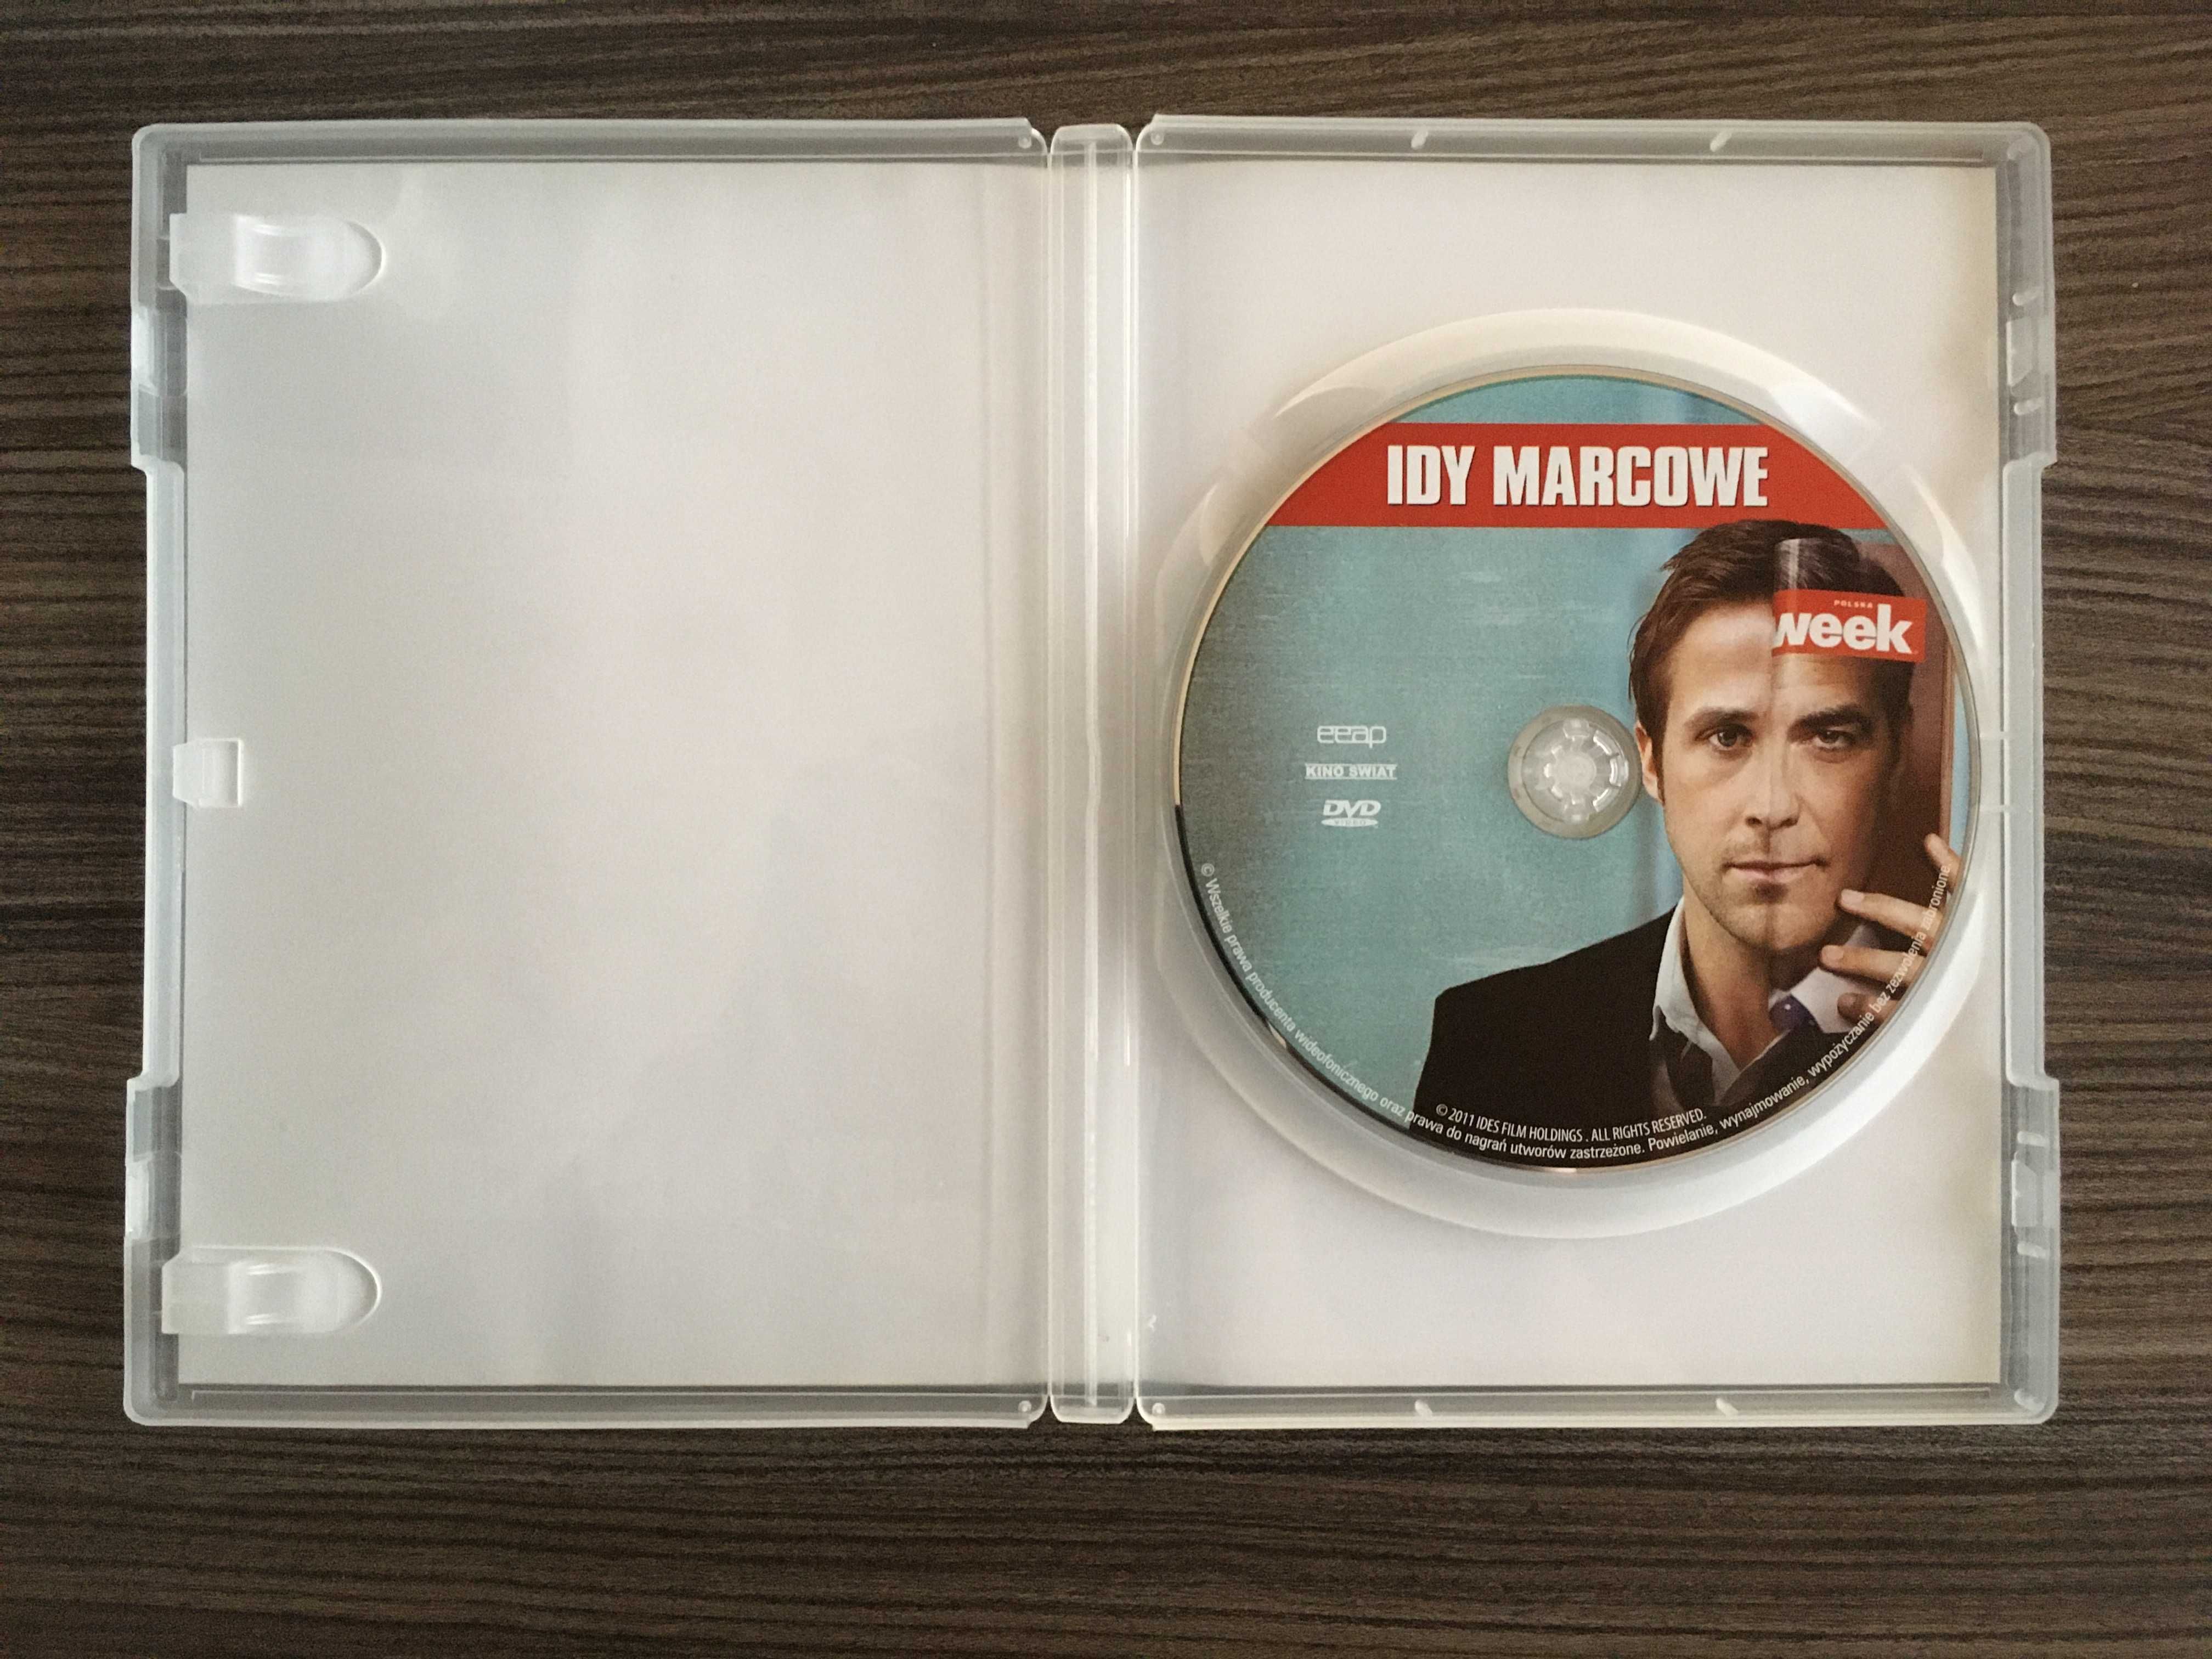 Film DVD "Idy Marcowe" (ang. The Ides Of March) (George Clooney)